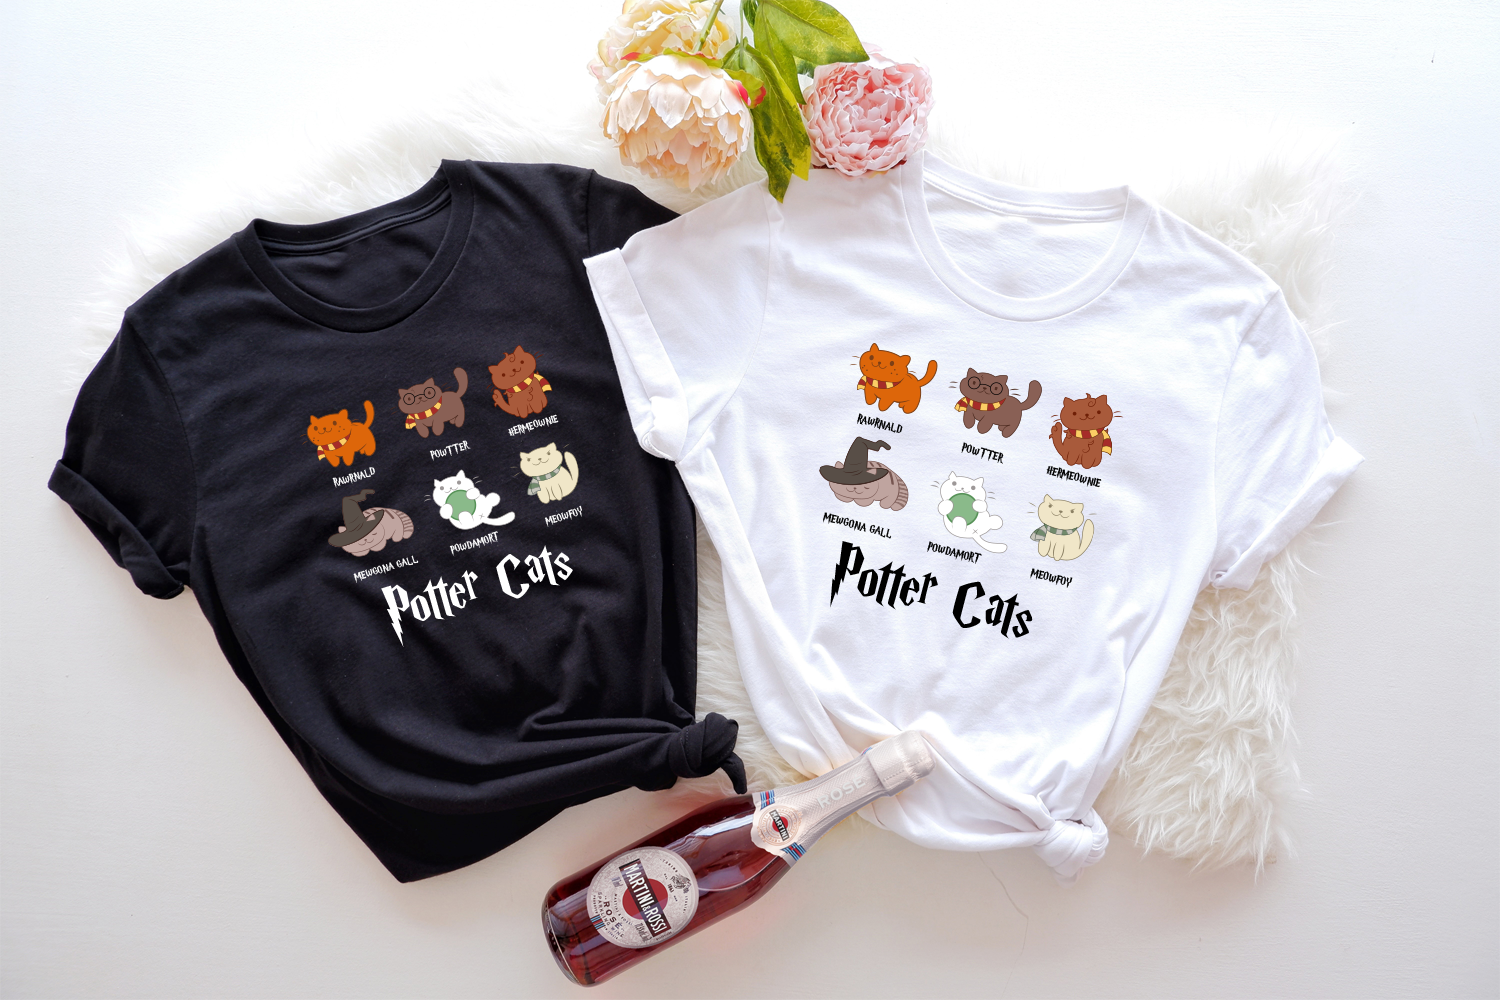 Potter Cats T-shirt: A magical mash-up of cats and wizards for Harry Potter fans.